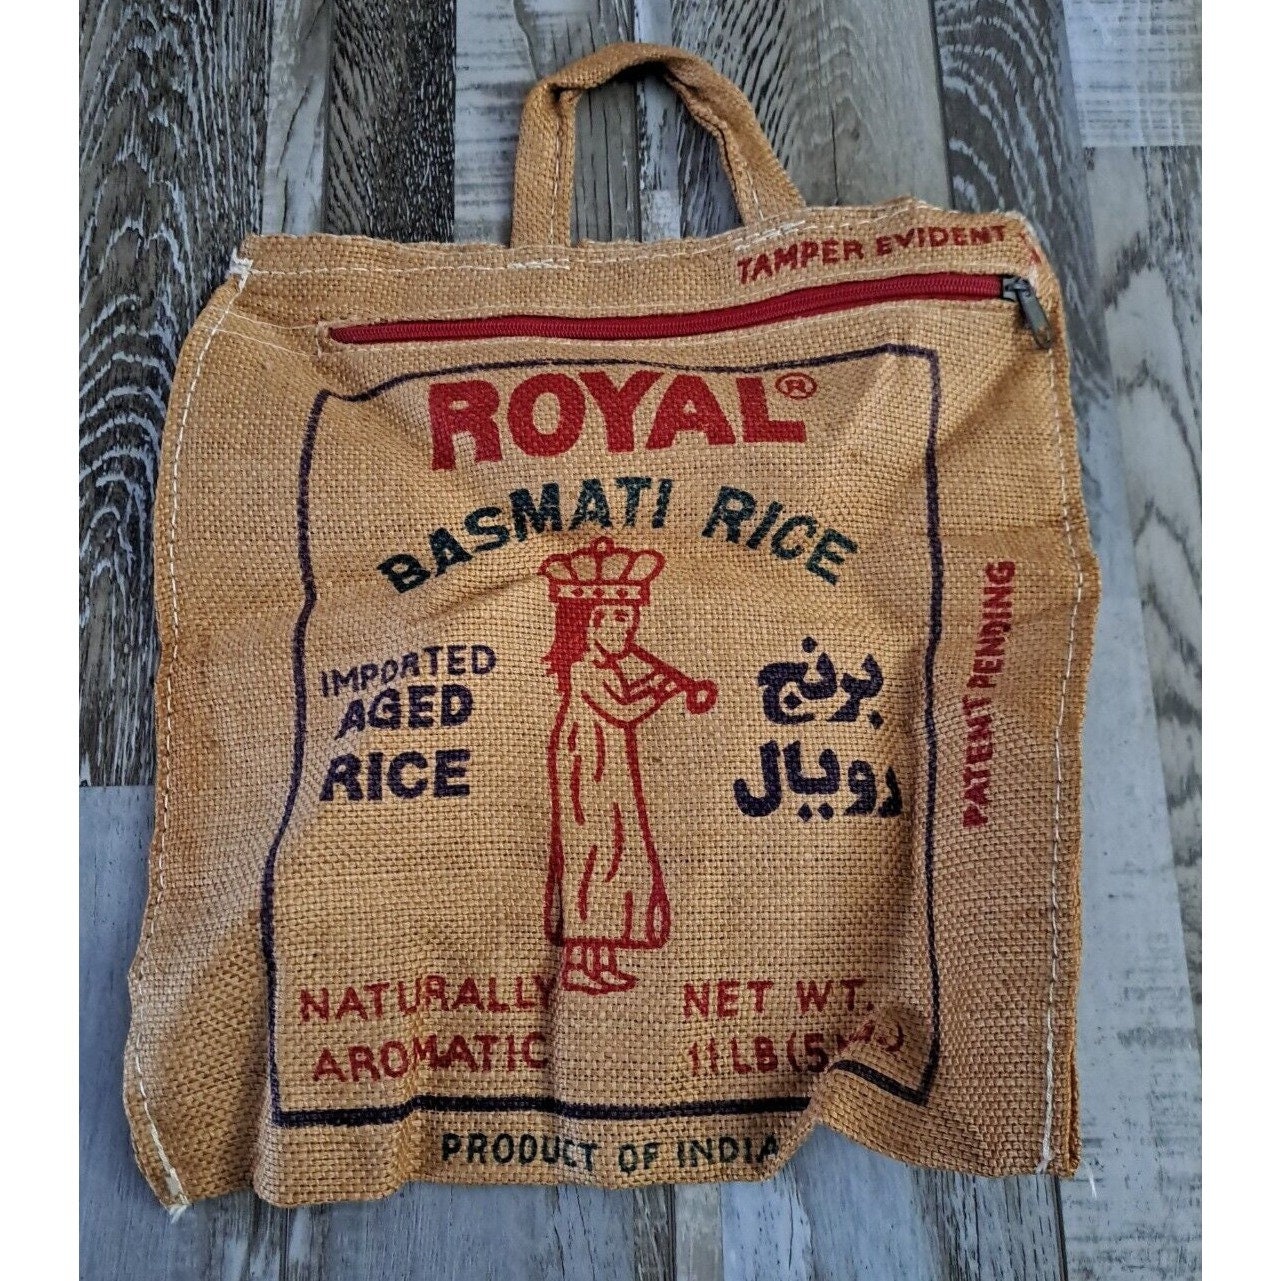 Plain Pp Non Woven Rice Bags Bag Size Medium at Best Price in Hyderabad   Syed Enterprises